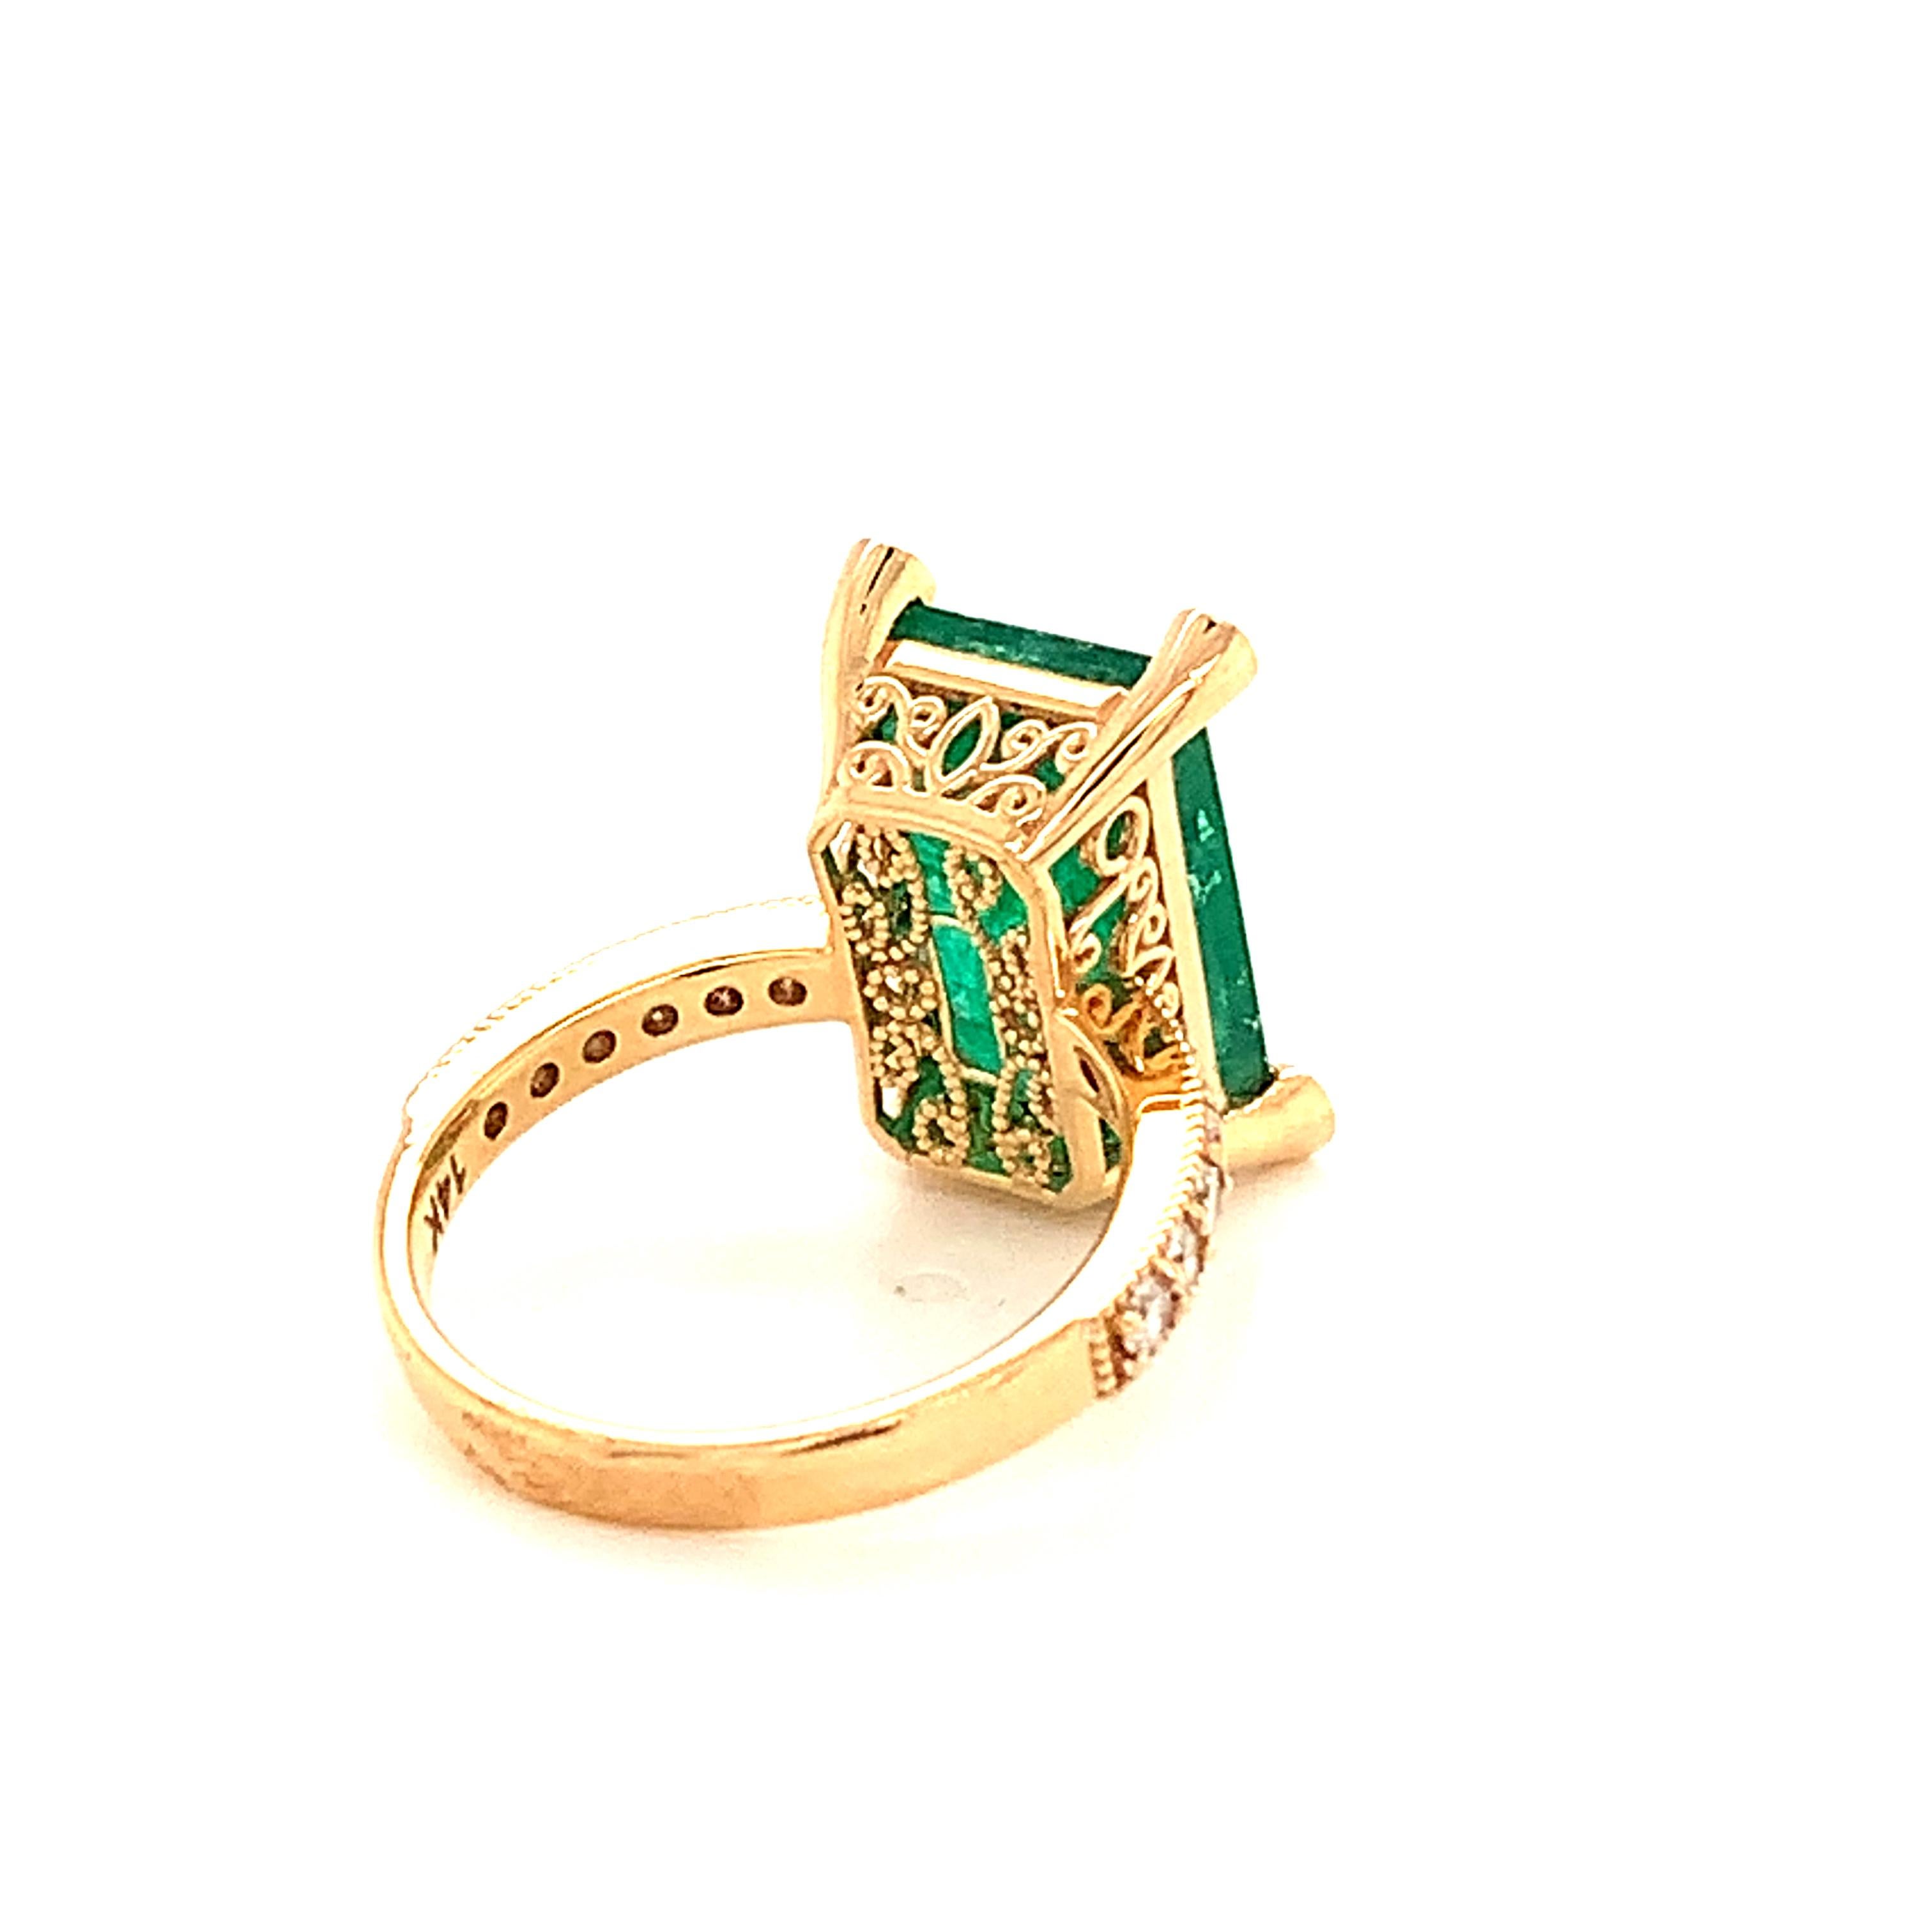 Natural Emerald Diamond Ring 14k Gold 4.37 TCW GIA Certified For Sale 4